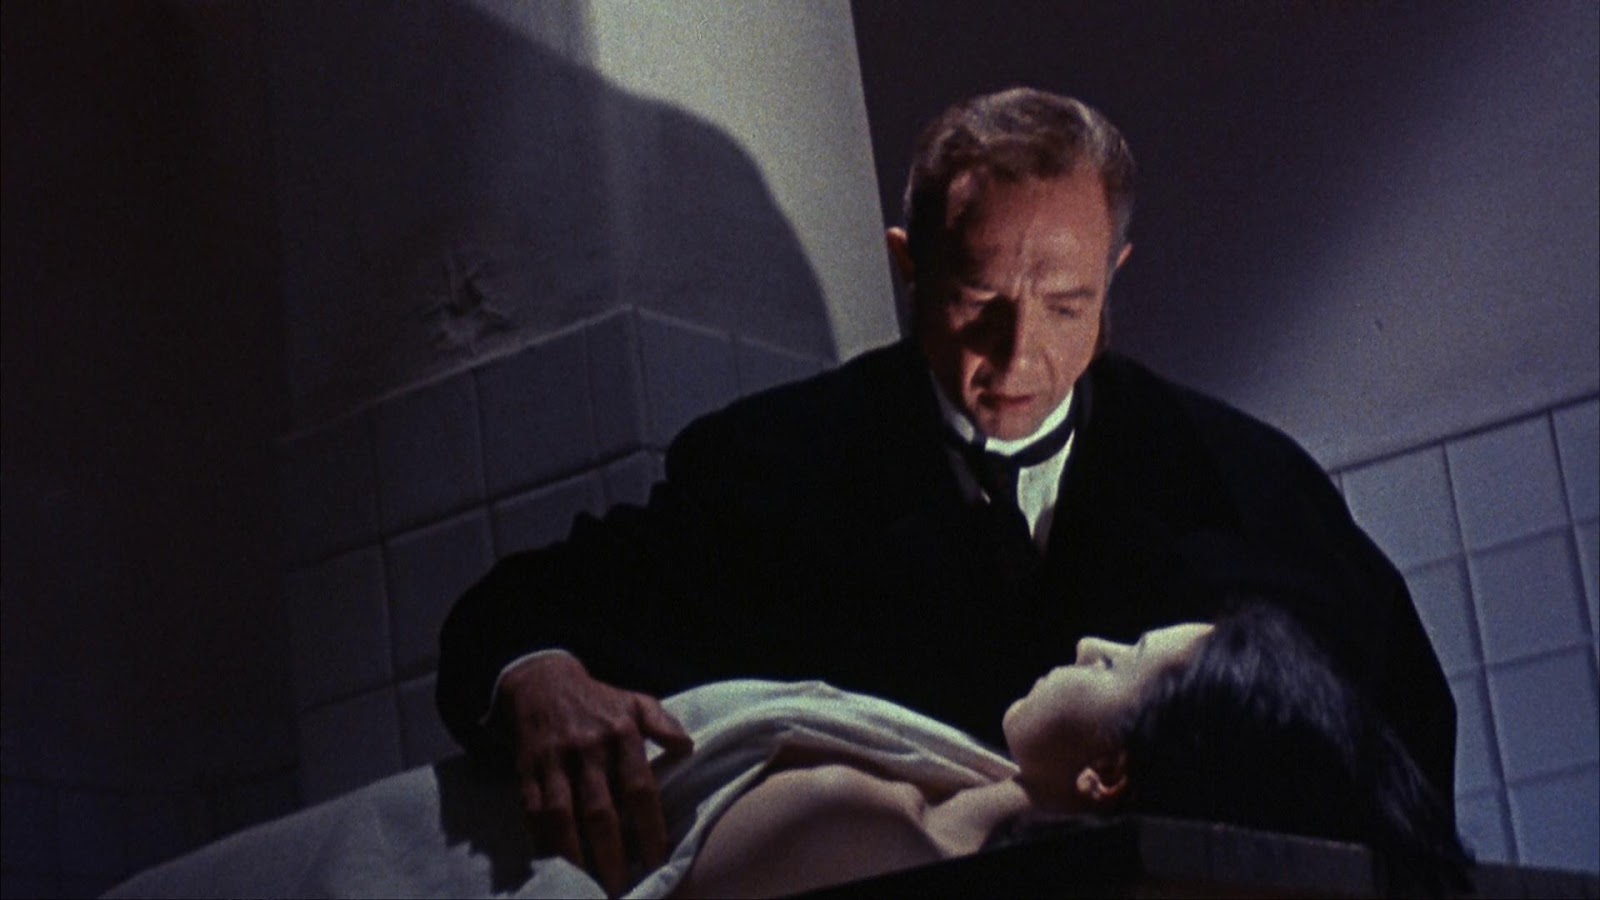 Dr Hichcock (Robert Flemyng) examines a body in The Terror of Dr Hichcock (1962)